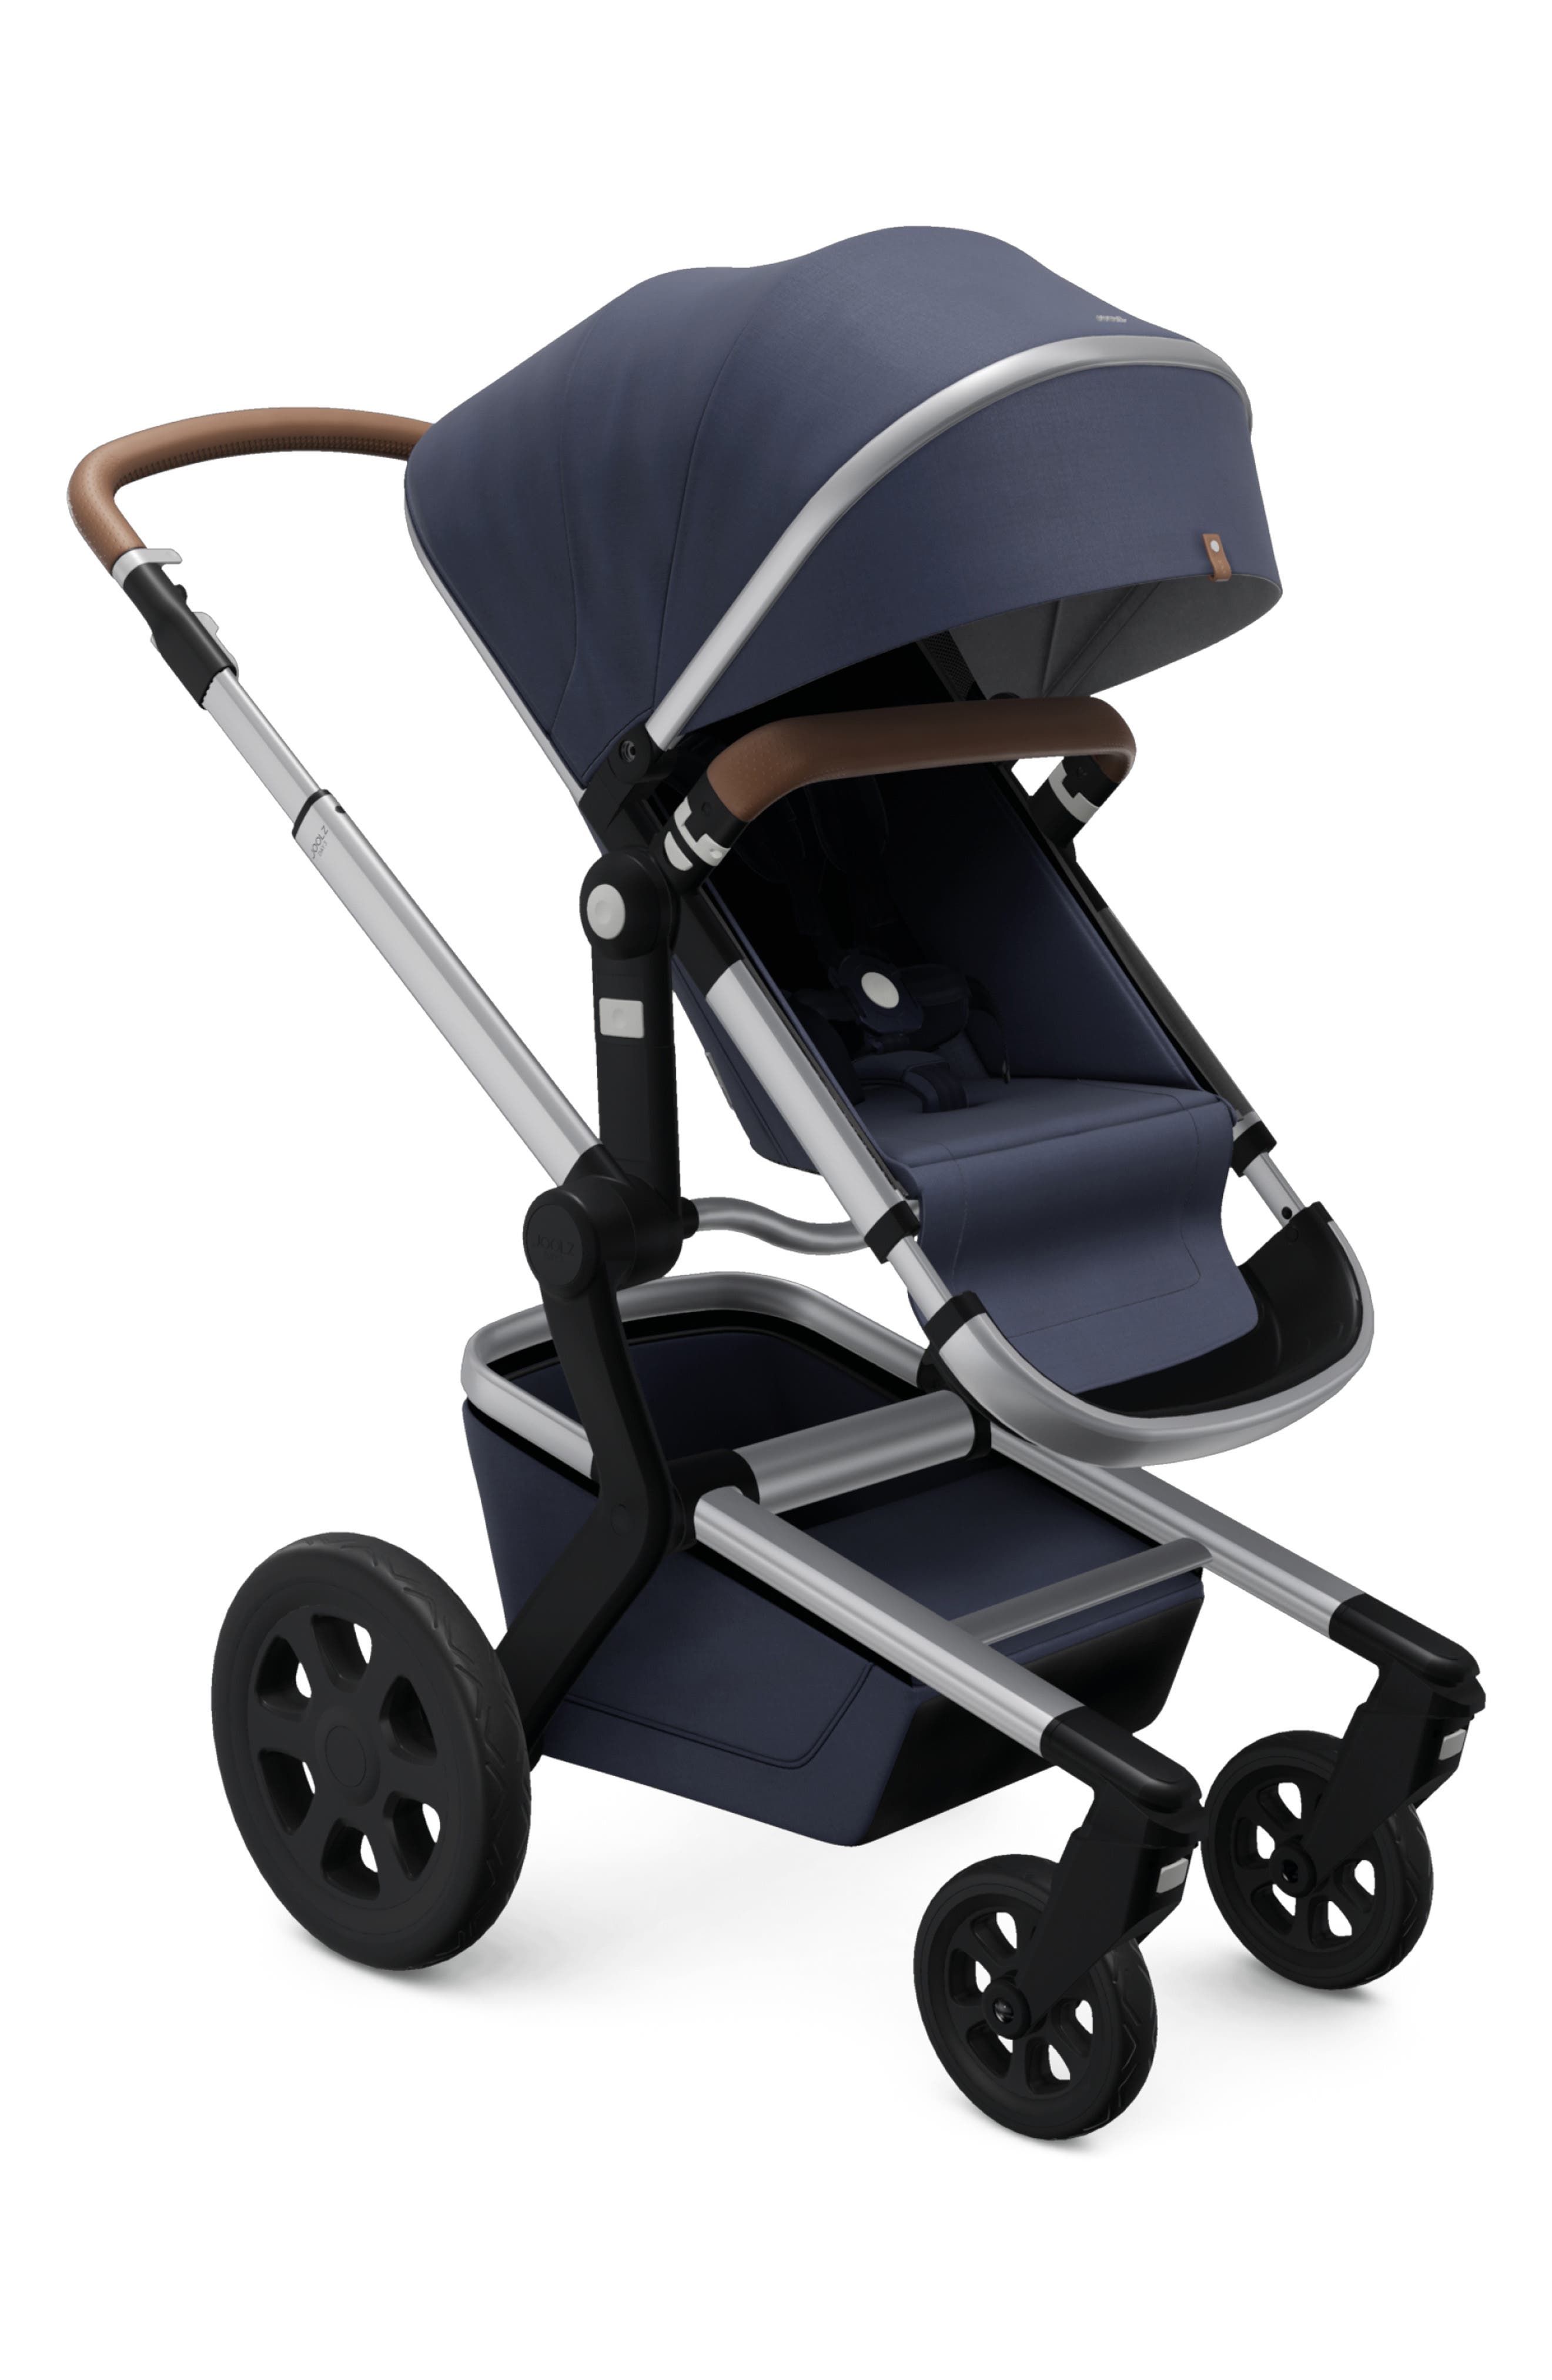 infant car seat with stroller attached